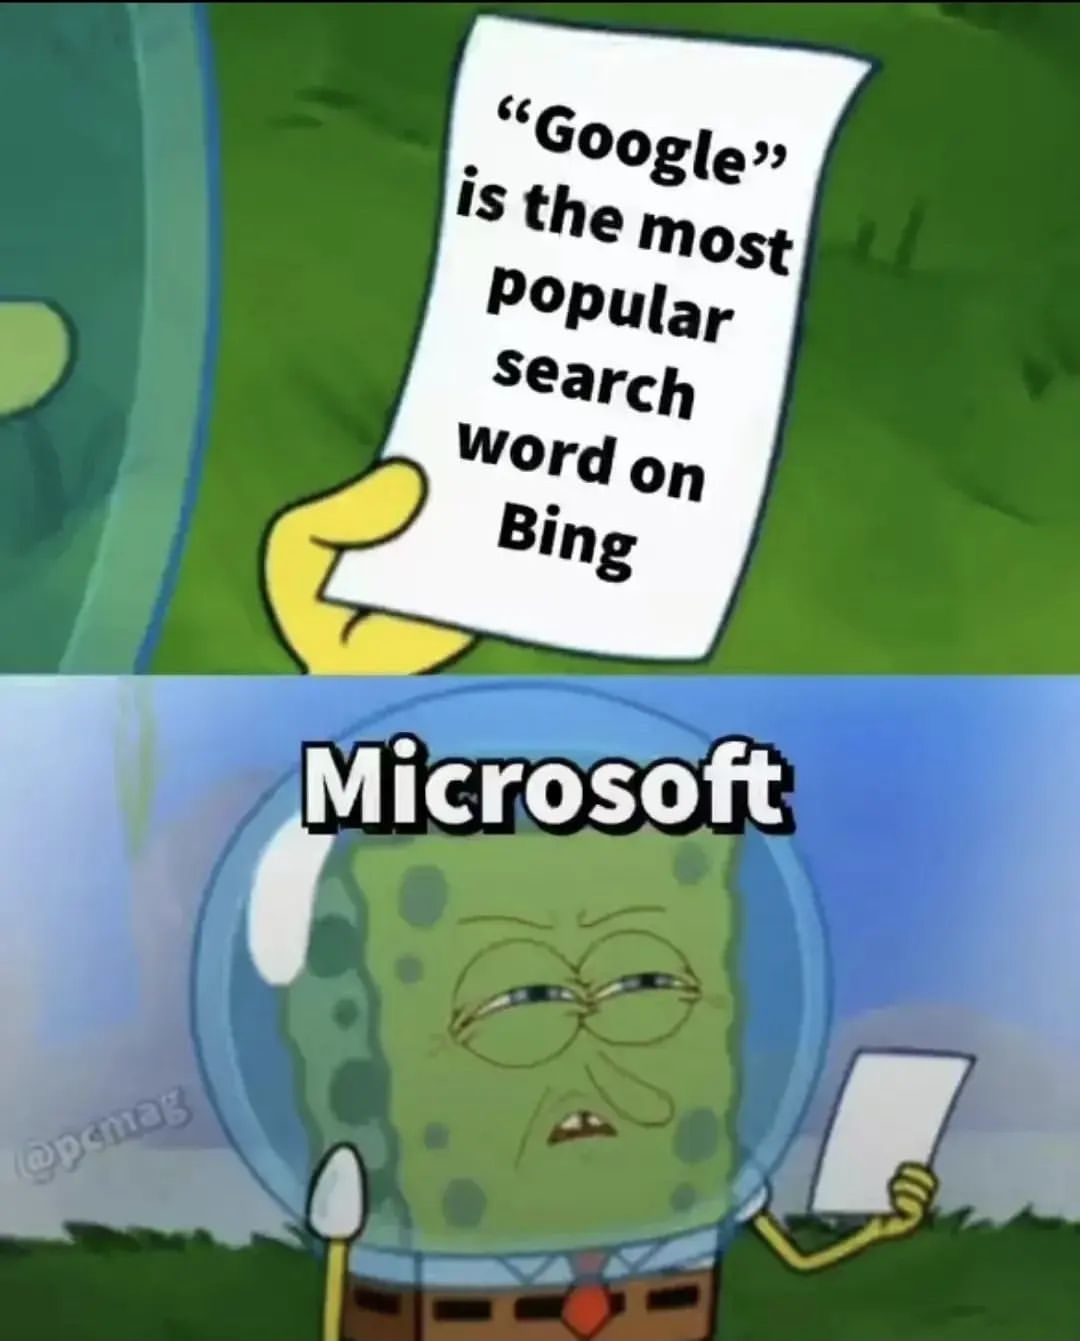 "Google" is the most Popular search word on Bing. Microsoft.